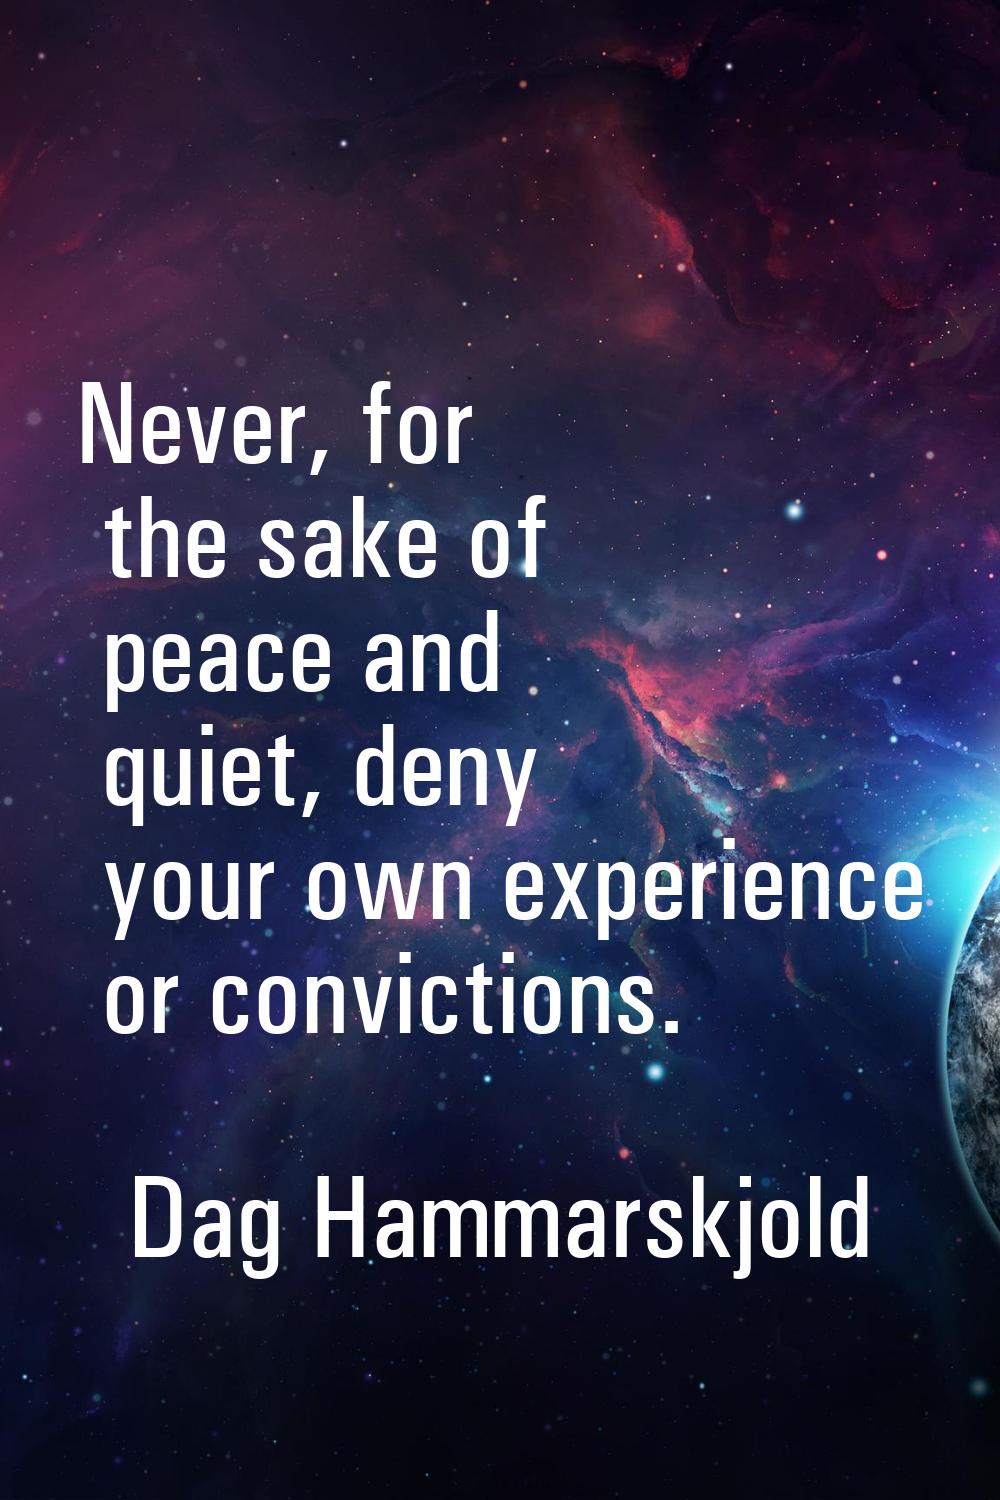 Never, for the sake of peace and quiet, deny your own experience or convictions.